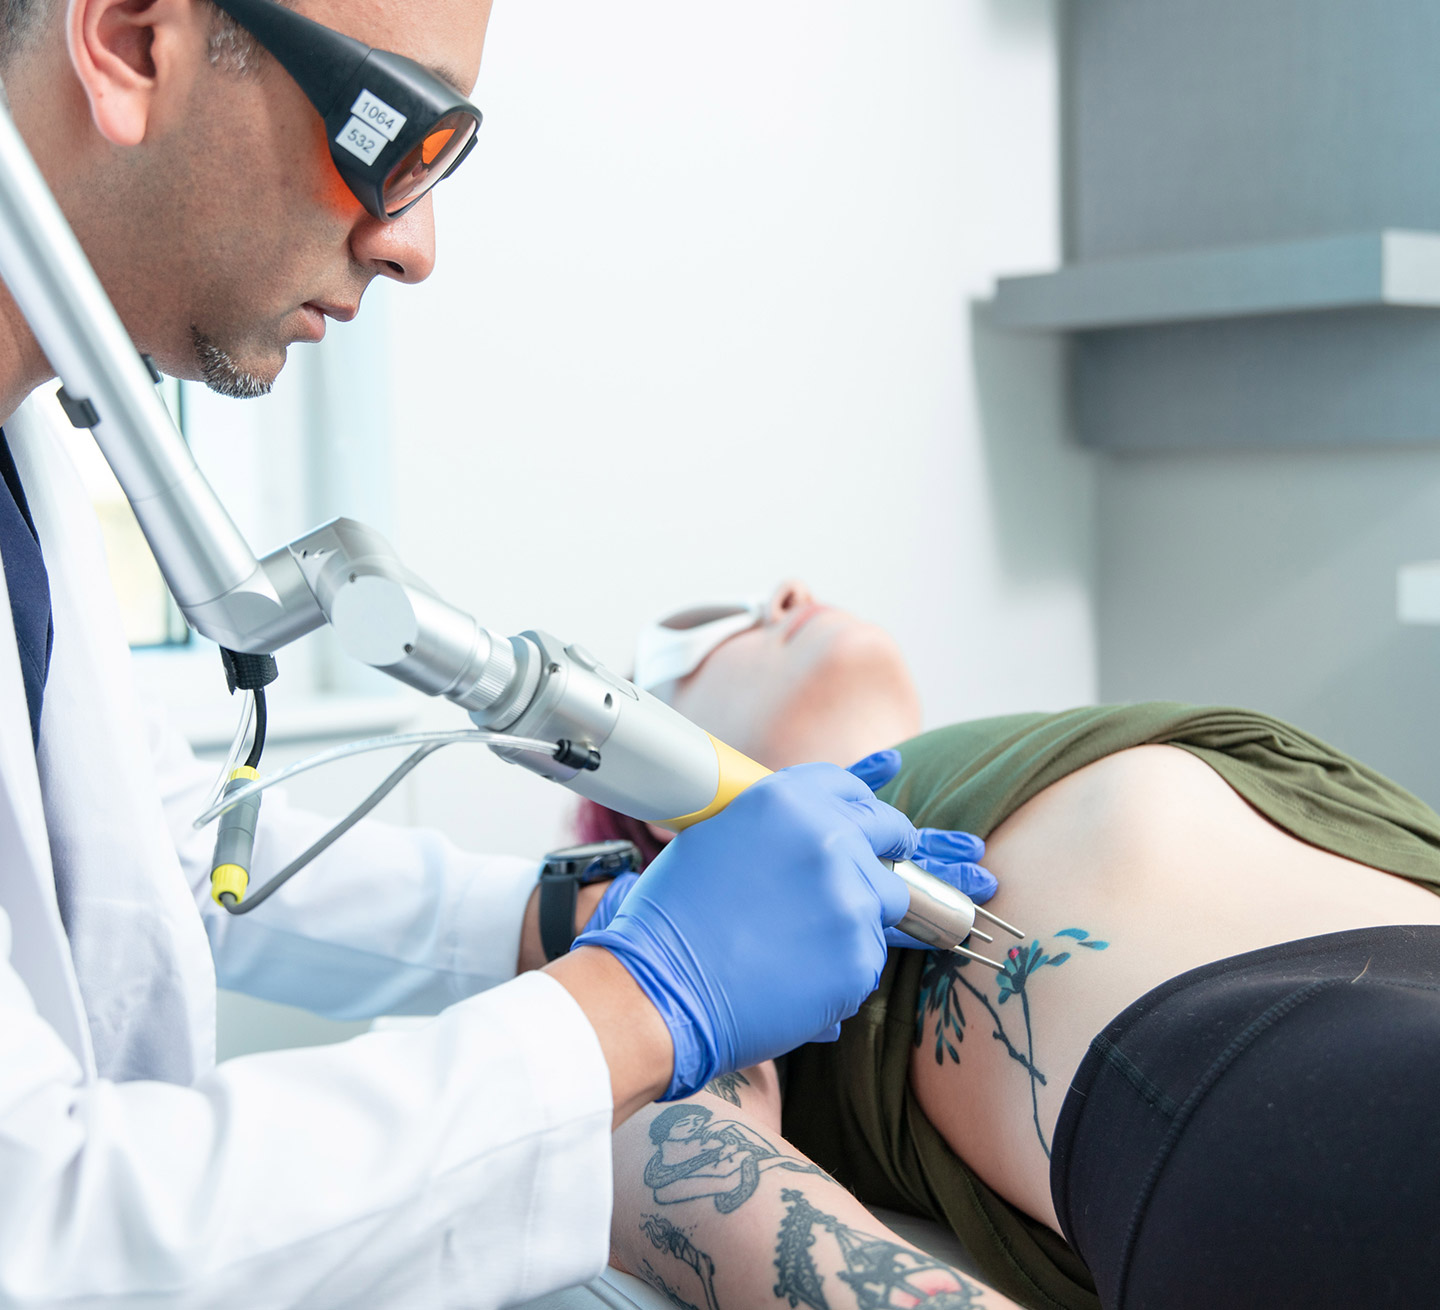 Laser Tattoo Removal, Procedure, Benefits and Risks | Pulse Light Clinic  London